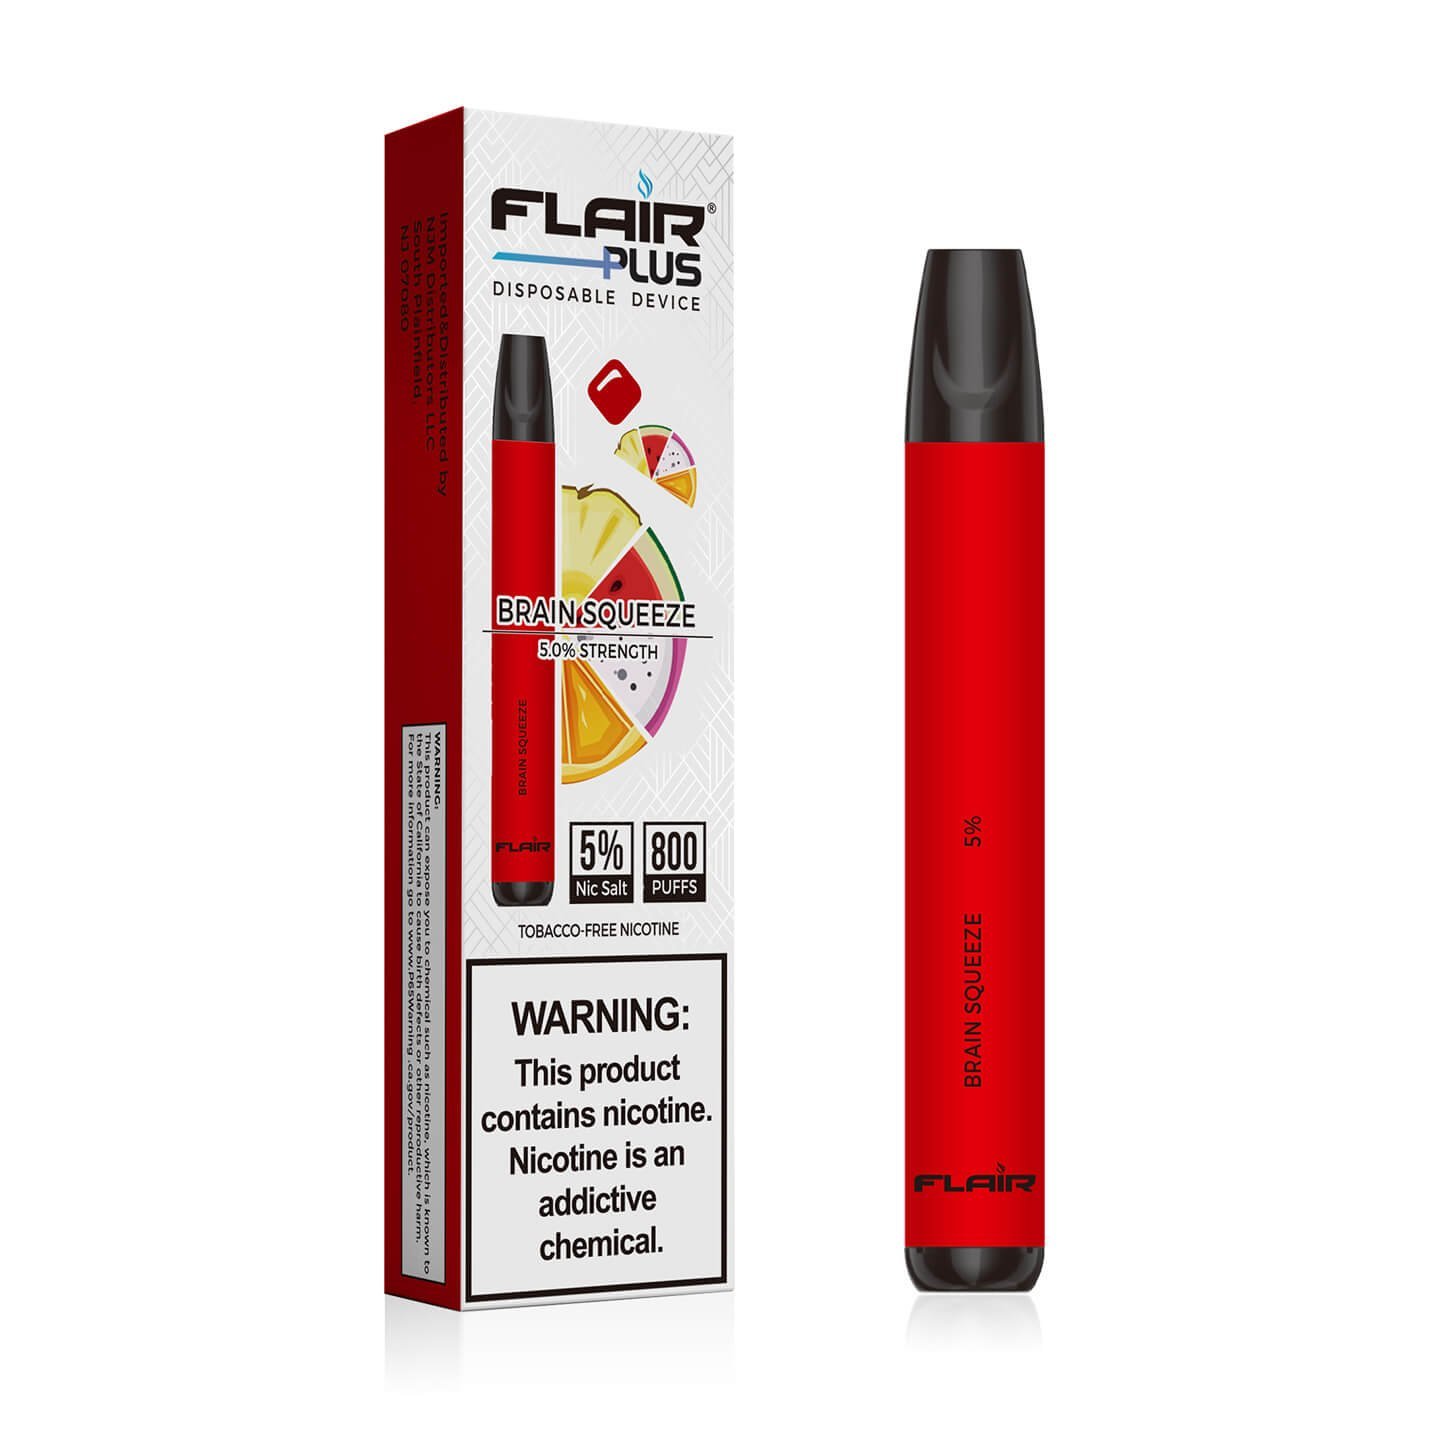 Flair Plus Disposable Devices (Brain Squeeze - 800 Puffs)